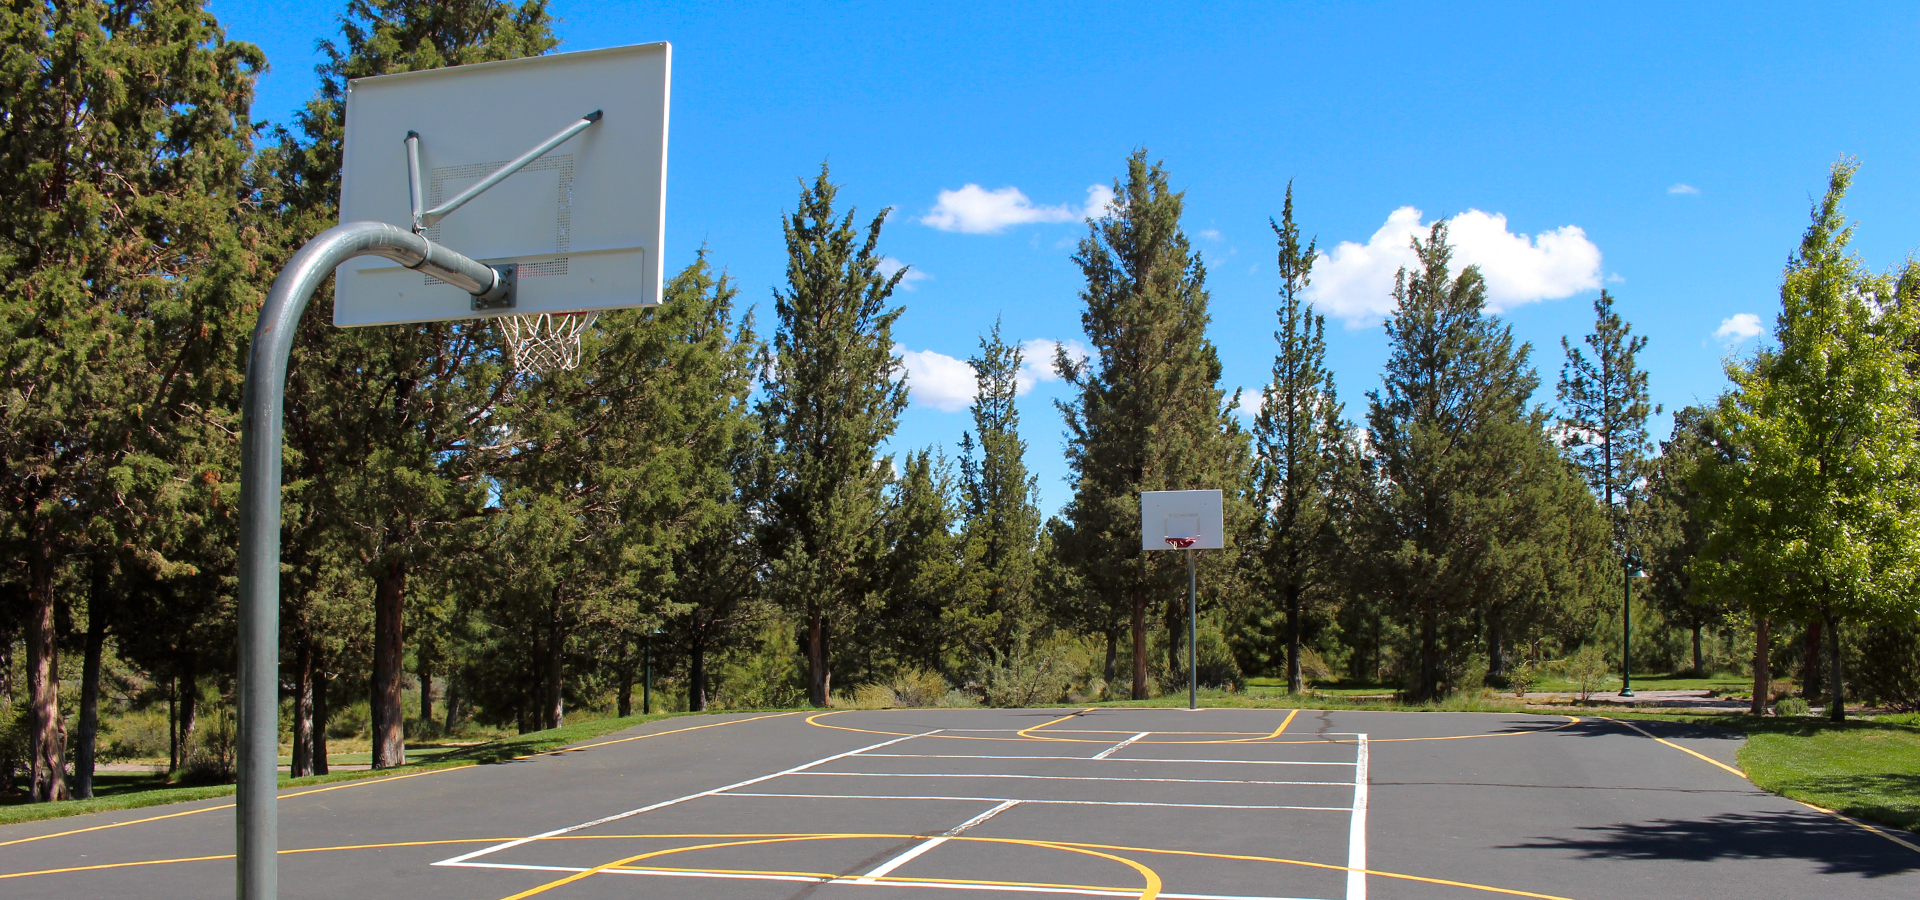 The basketball courts at Larkspur Park.